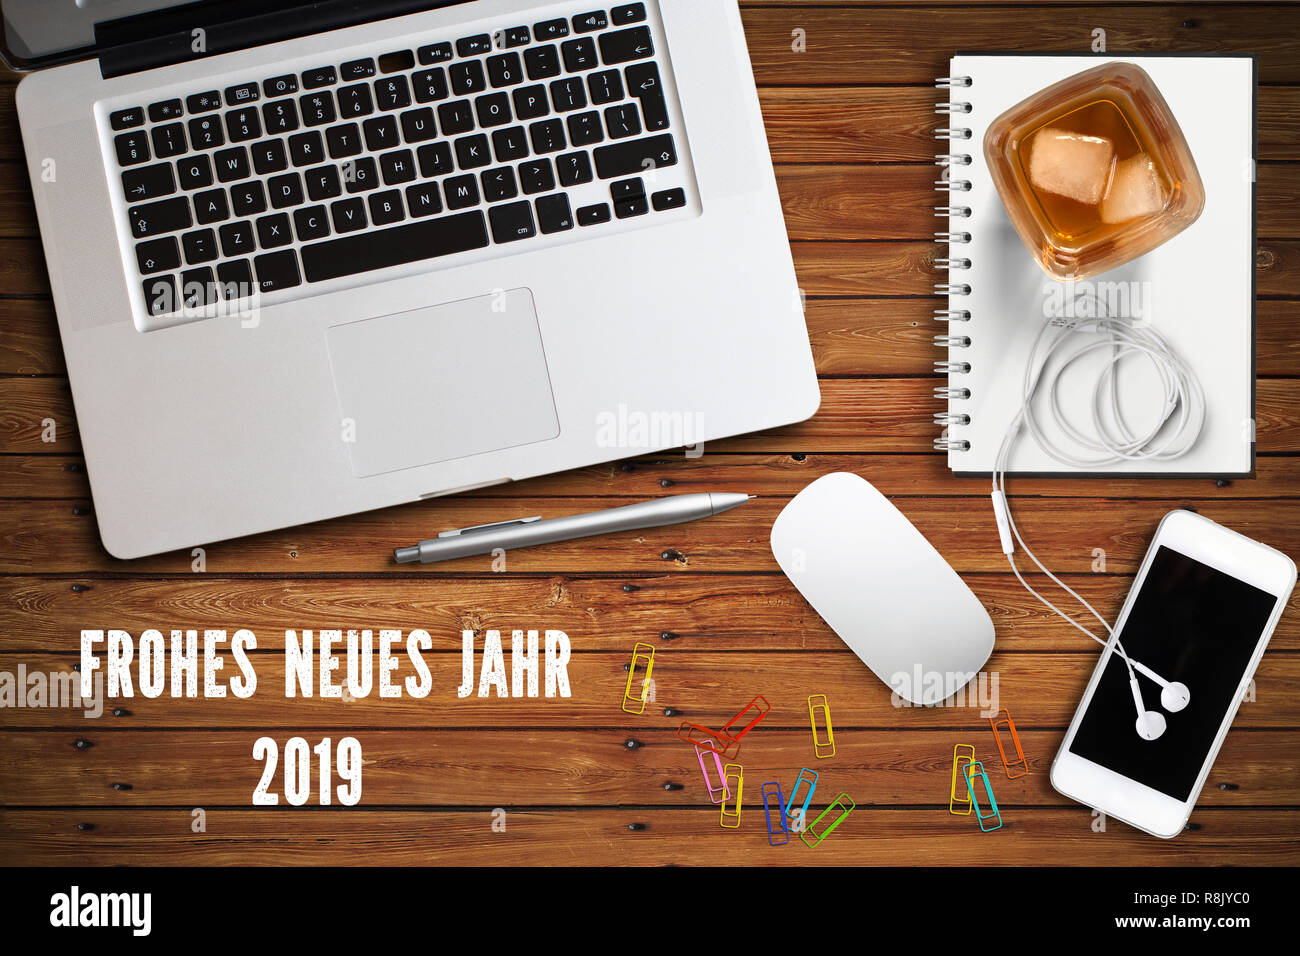 computer workspace with smartphone, a drink and the message "Happy new year 2019" in German on wooden background Stock Photo